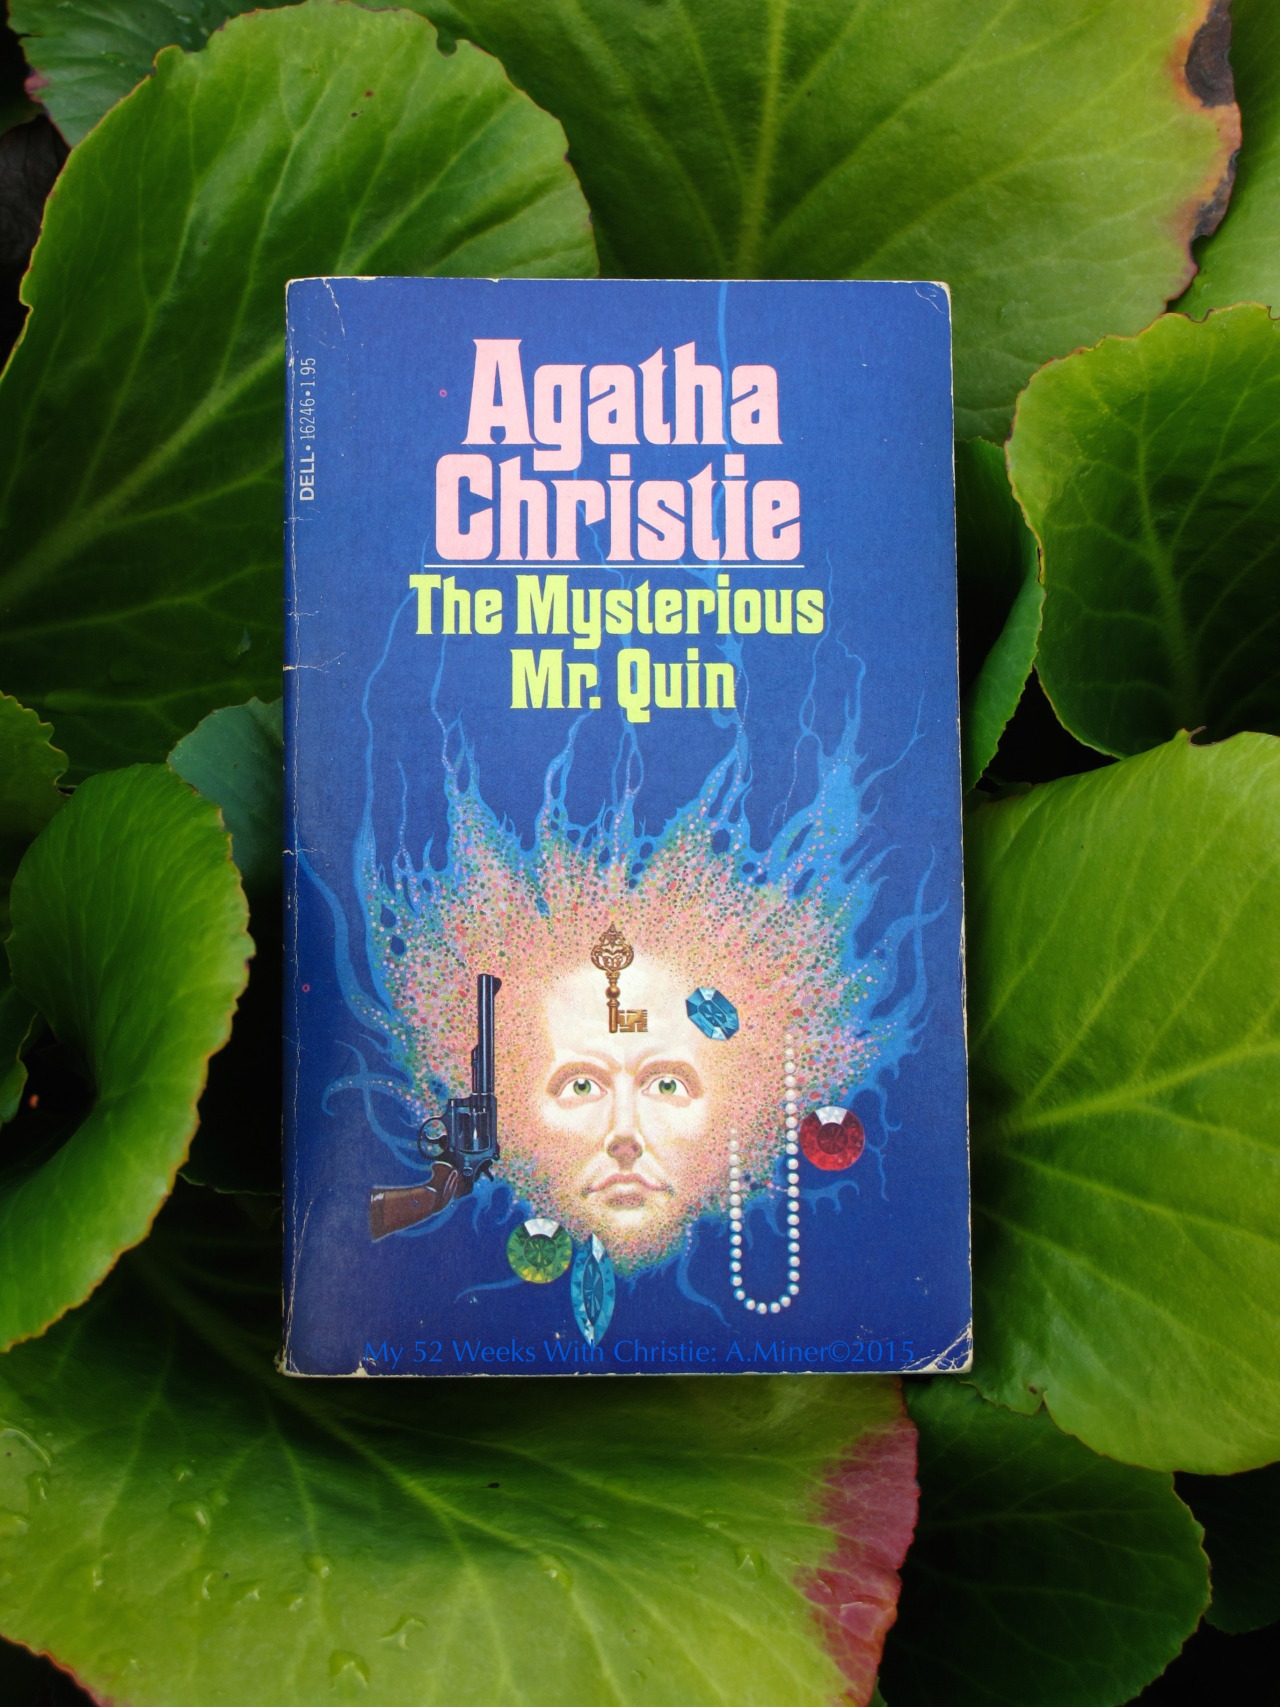 My 52 Weeks With Agatha Christie